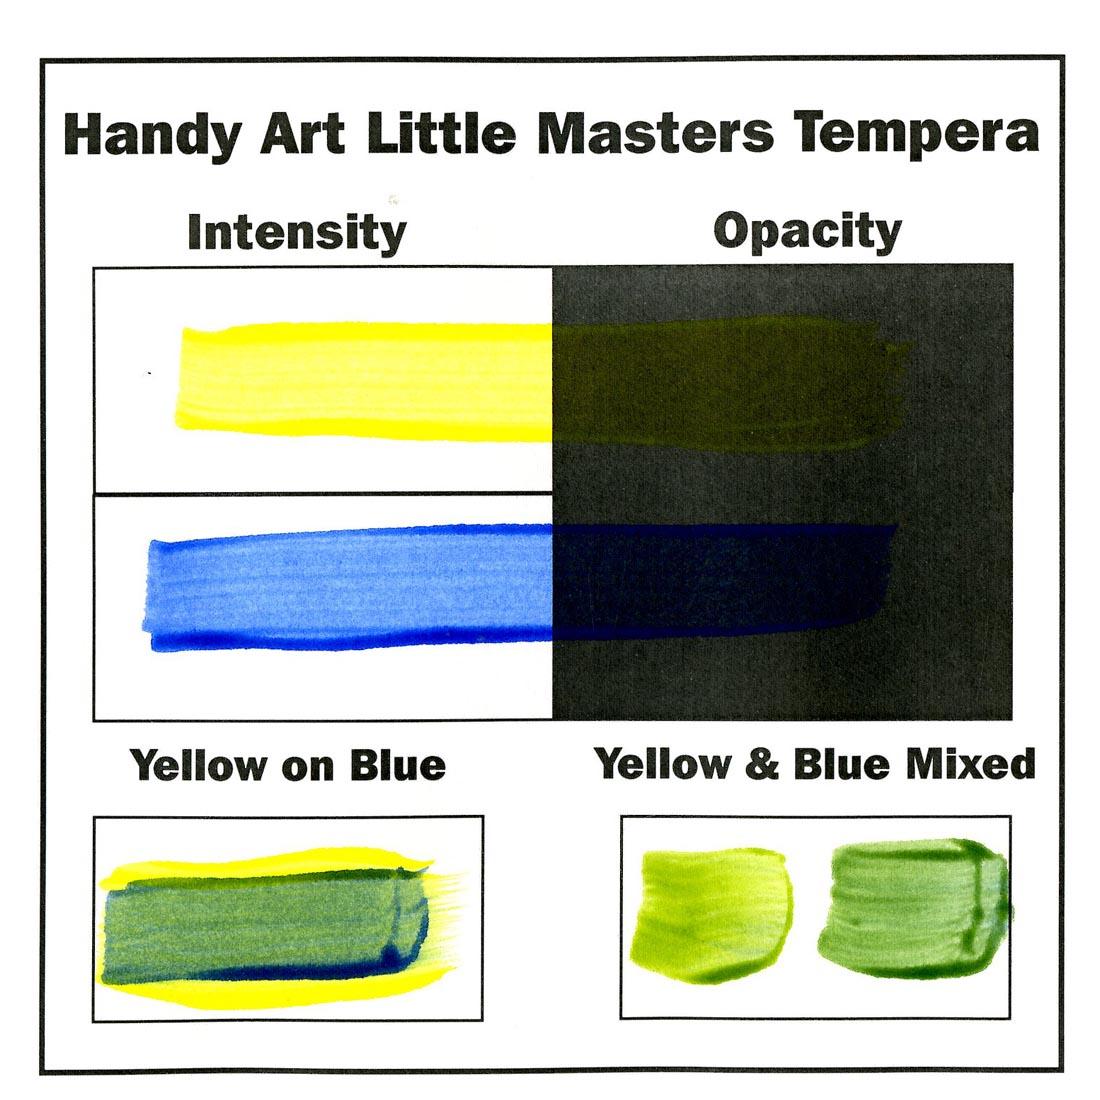 Swatches of blue and yellow Handy Art Little Masters washable tempera paint, showing intensity and opacity, plus yellow over blue, and blue & yellow mixed